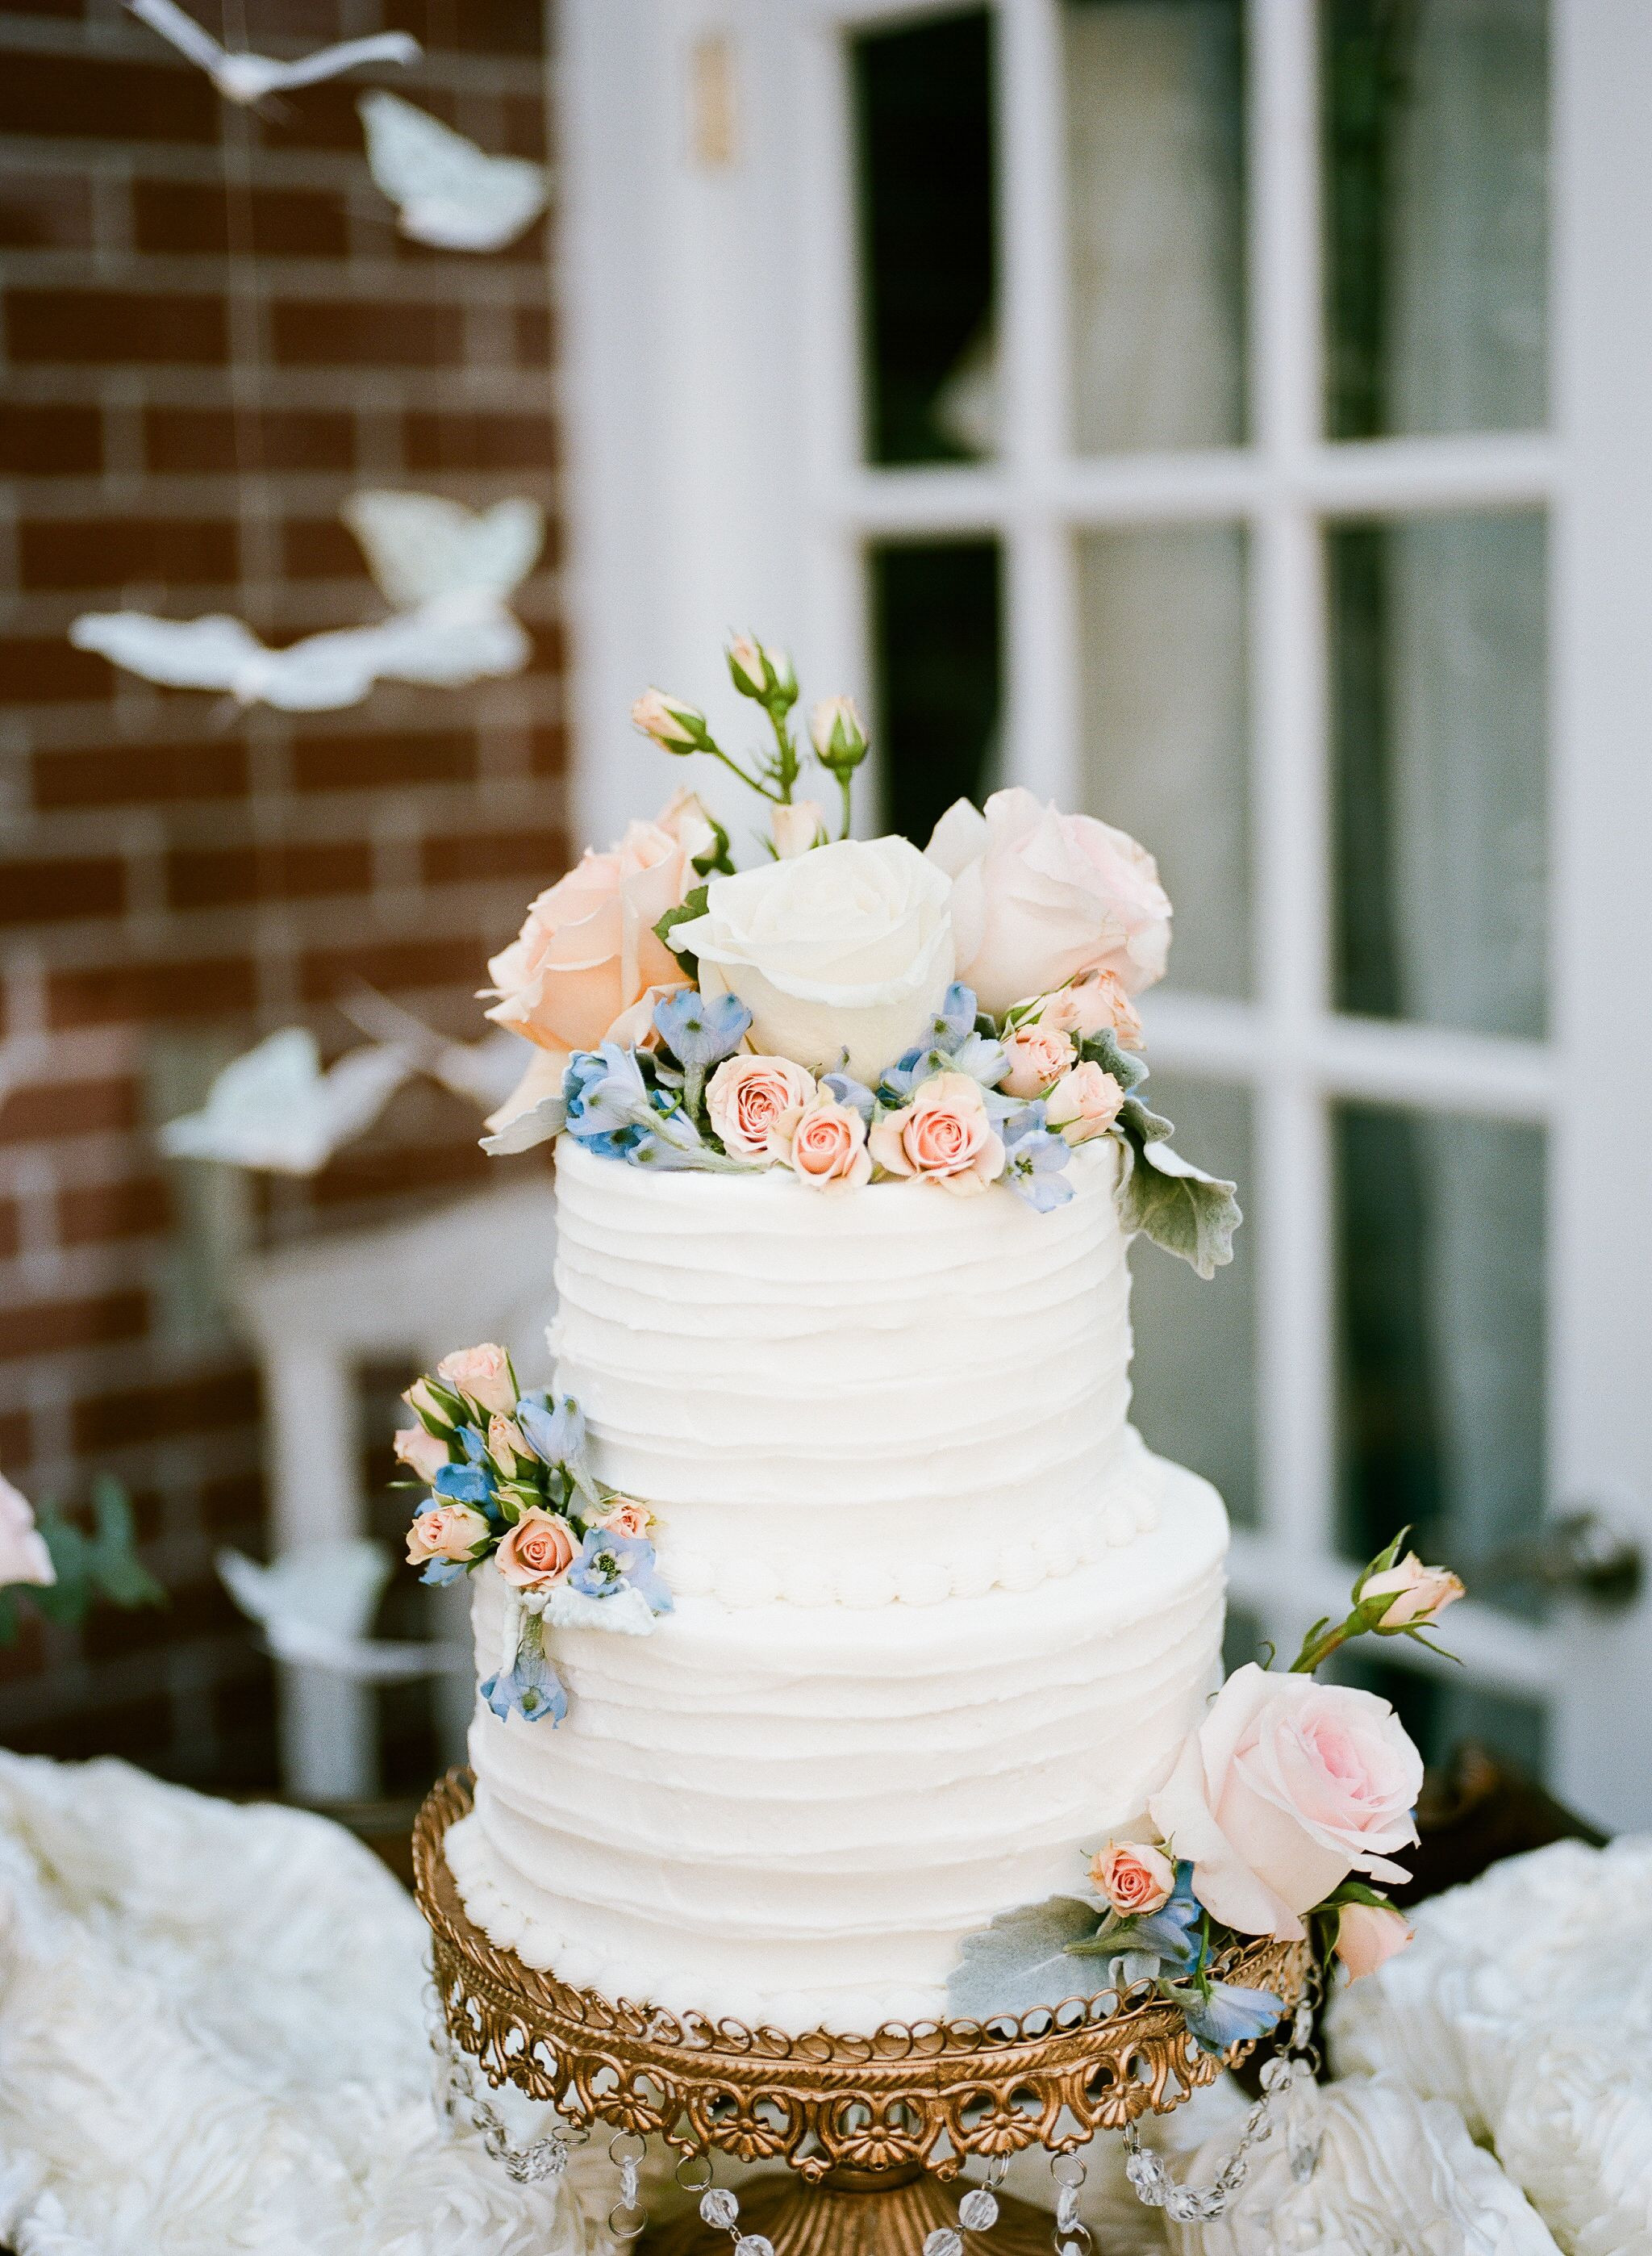 Wedding Cakes With Blue Flowers
 Buttercream Wedding Cake With Blush and Blue Flowers